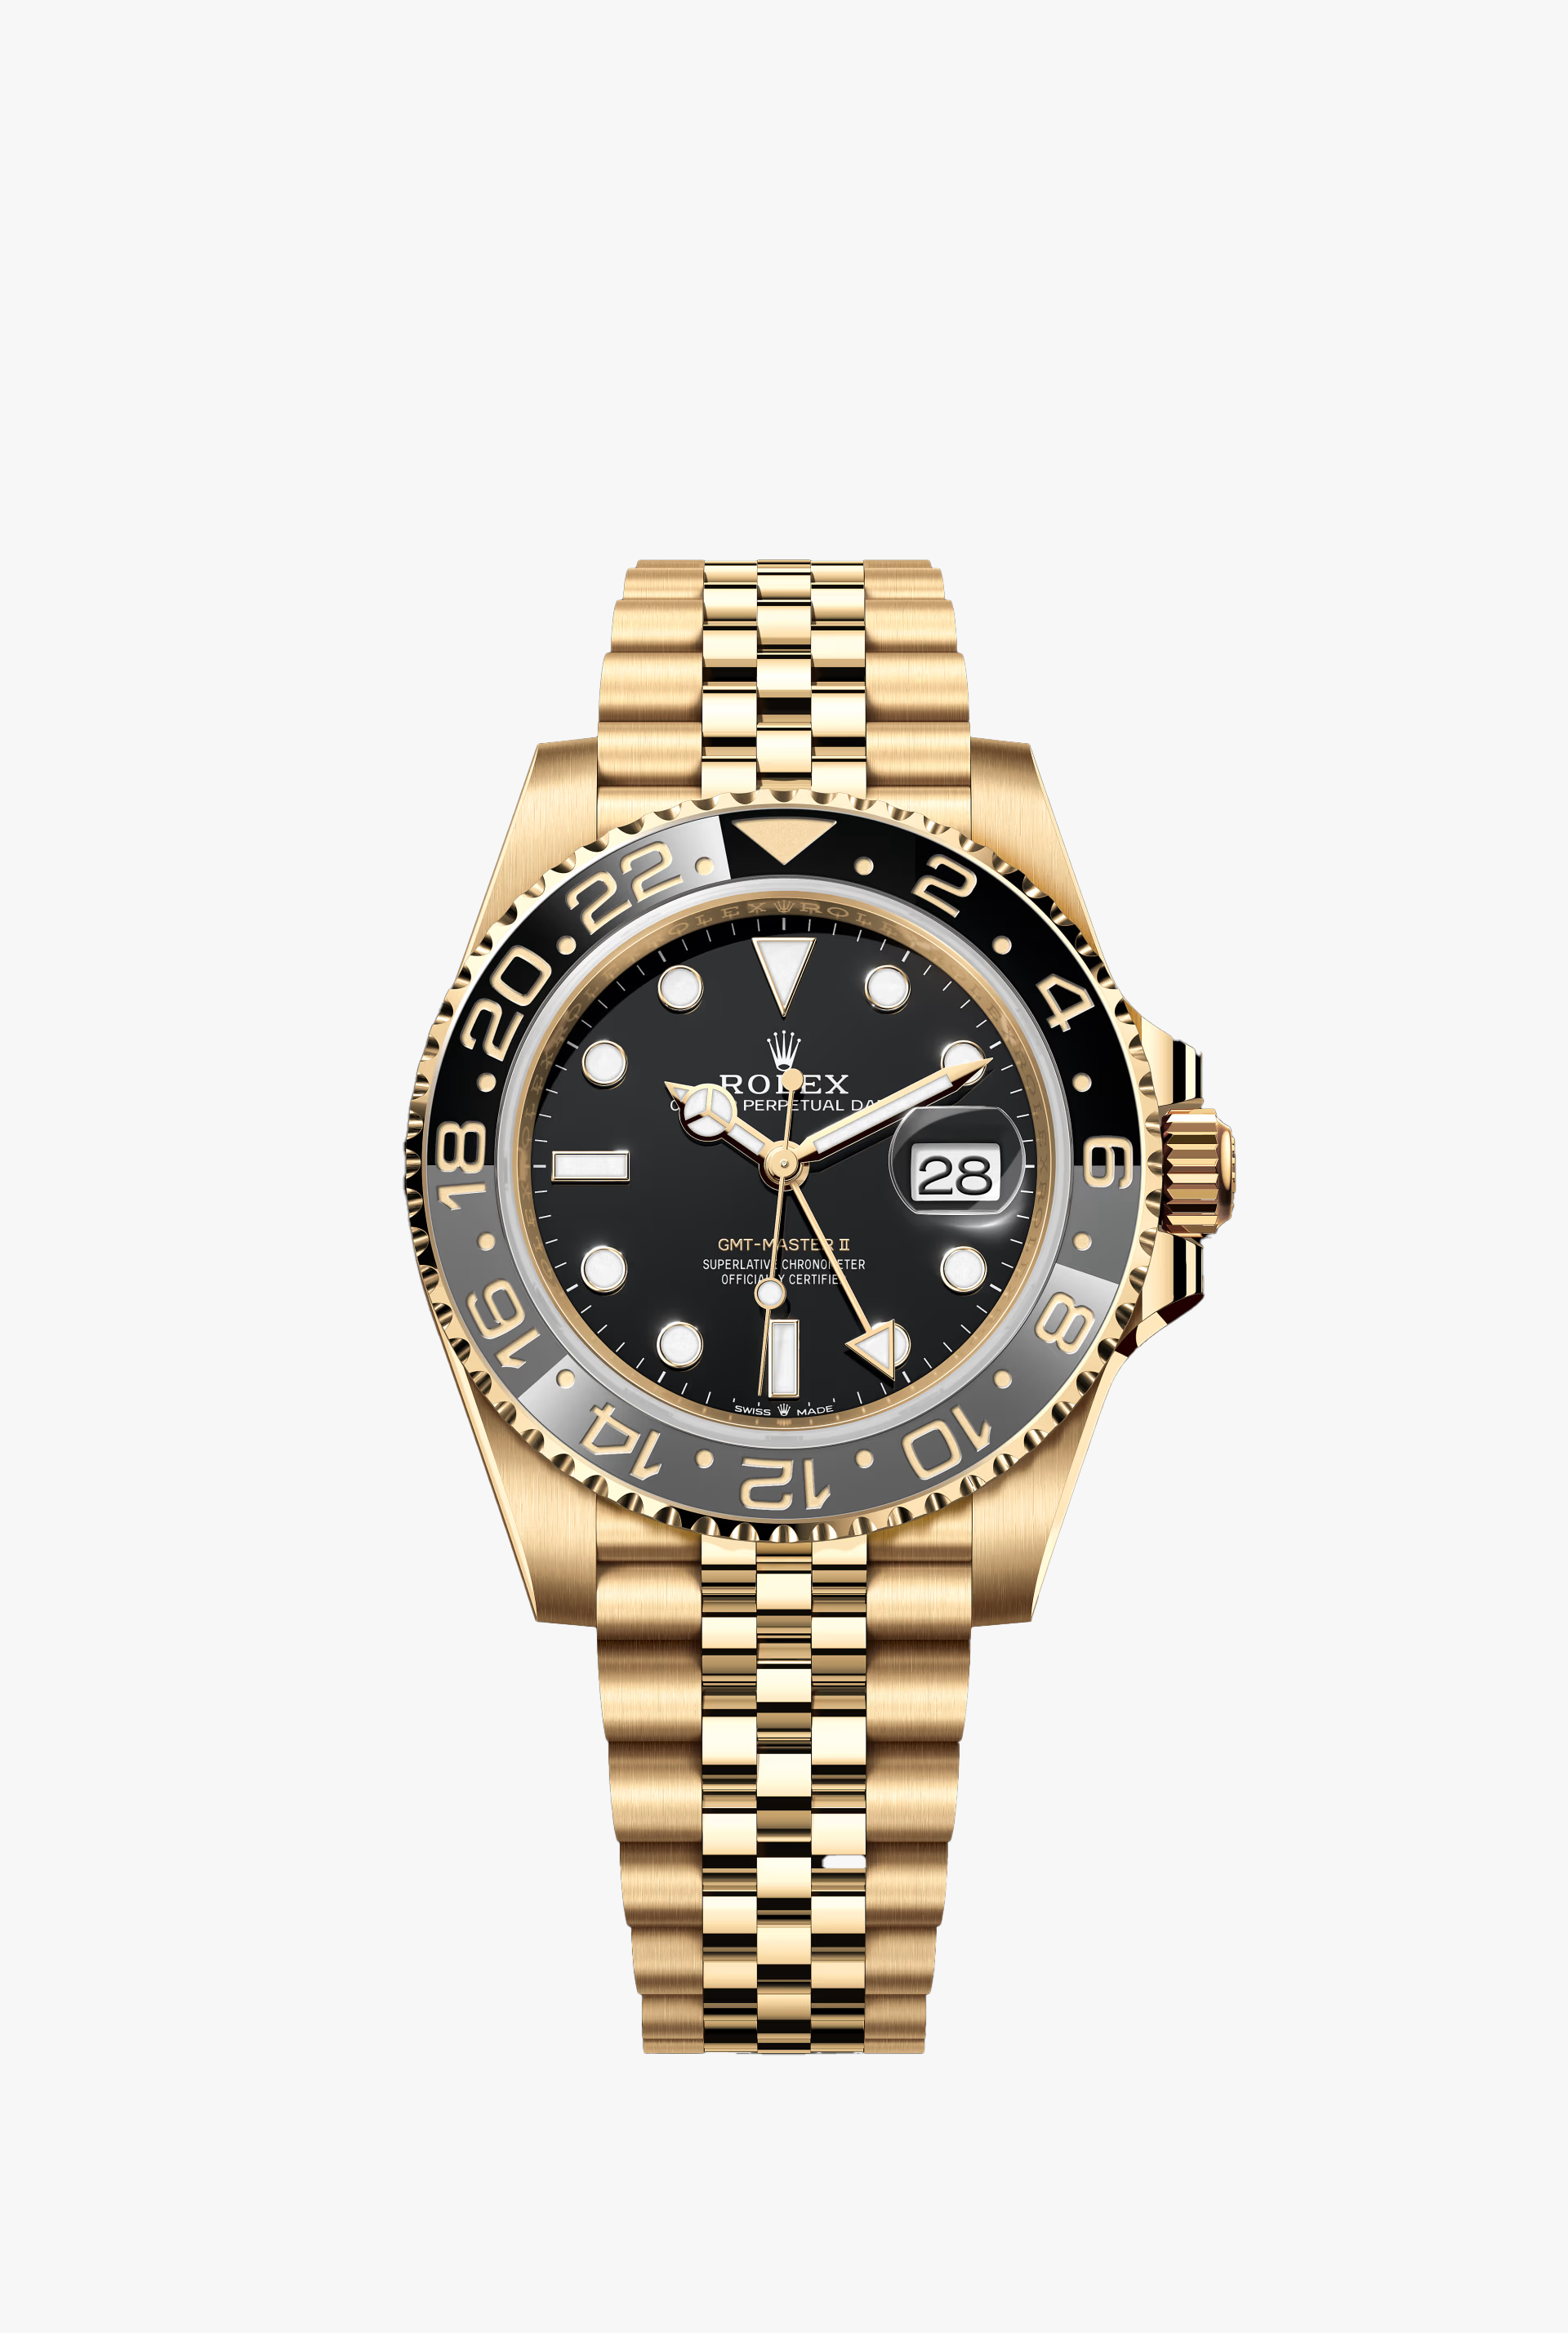 Rolex GMT-Masterl Oyster,40 mm, yellow gold Reference 126718GRNR